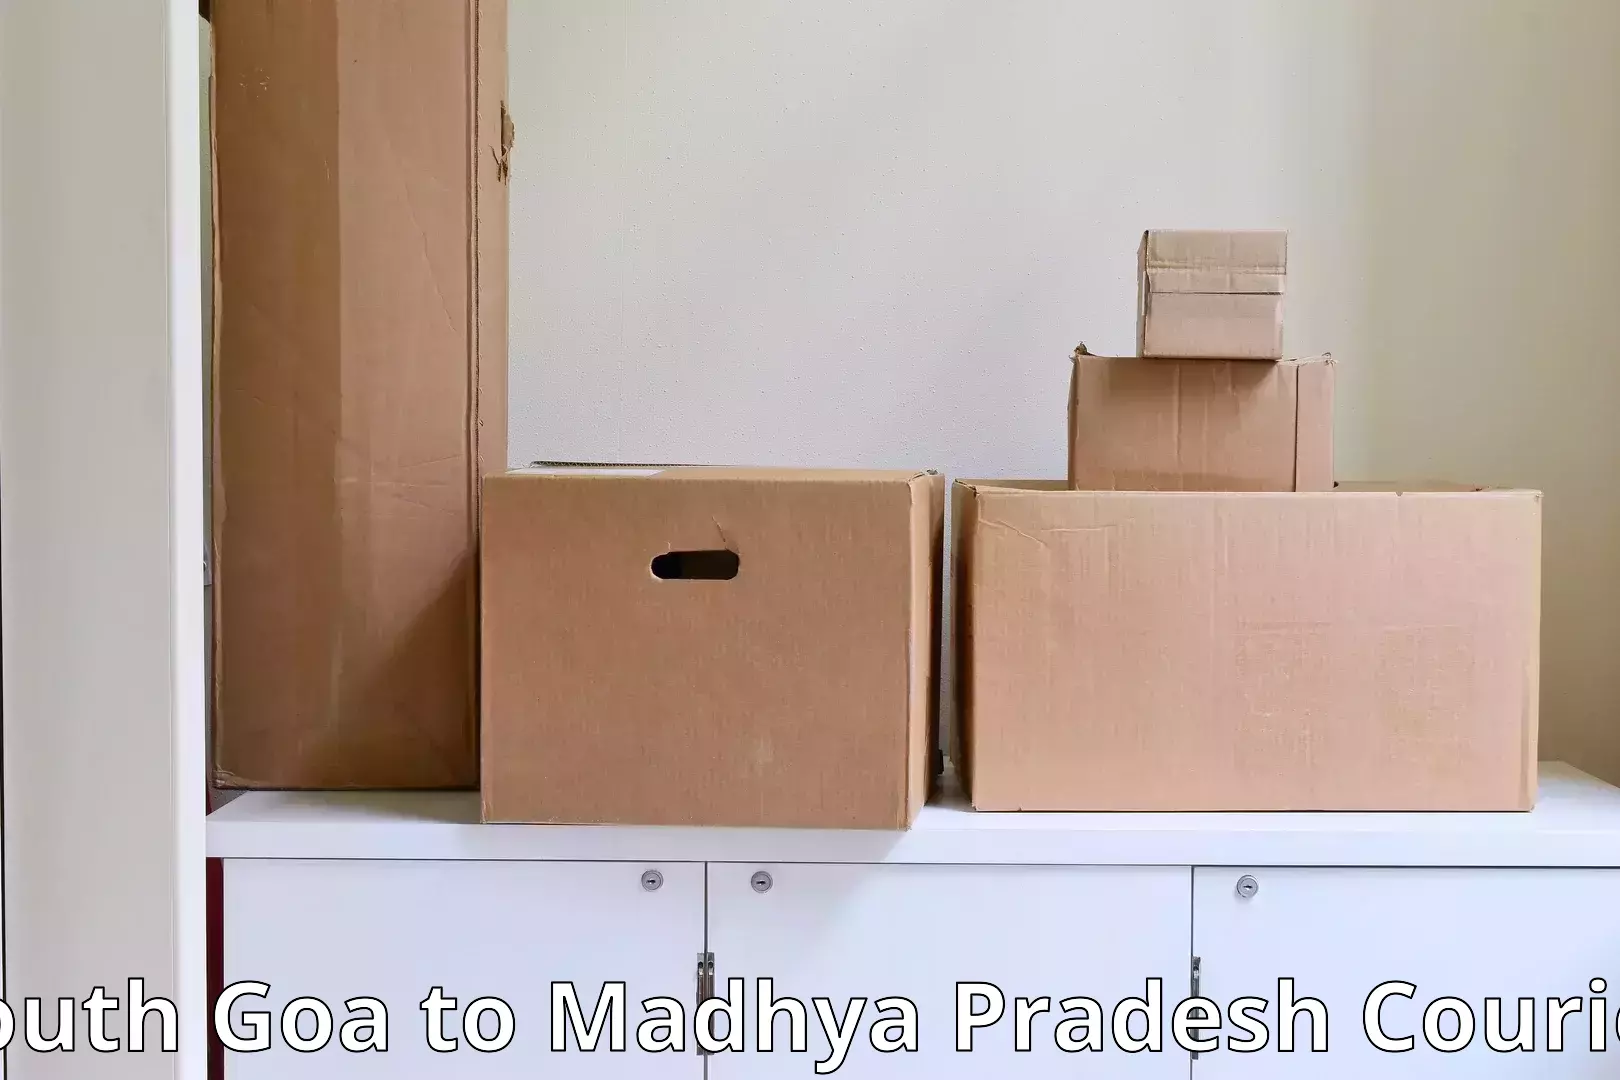 Moving and storage services in South Goa to Barwani